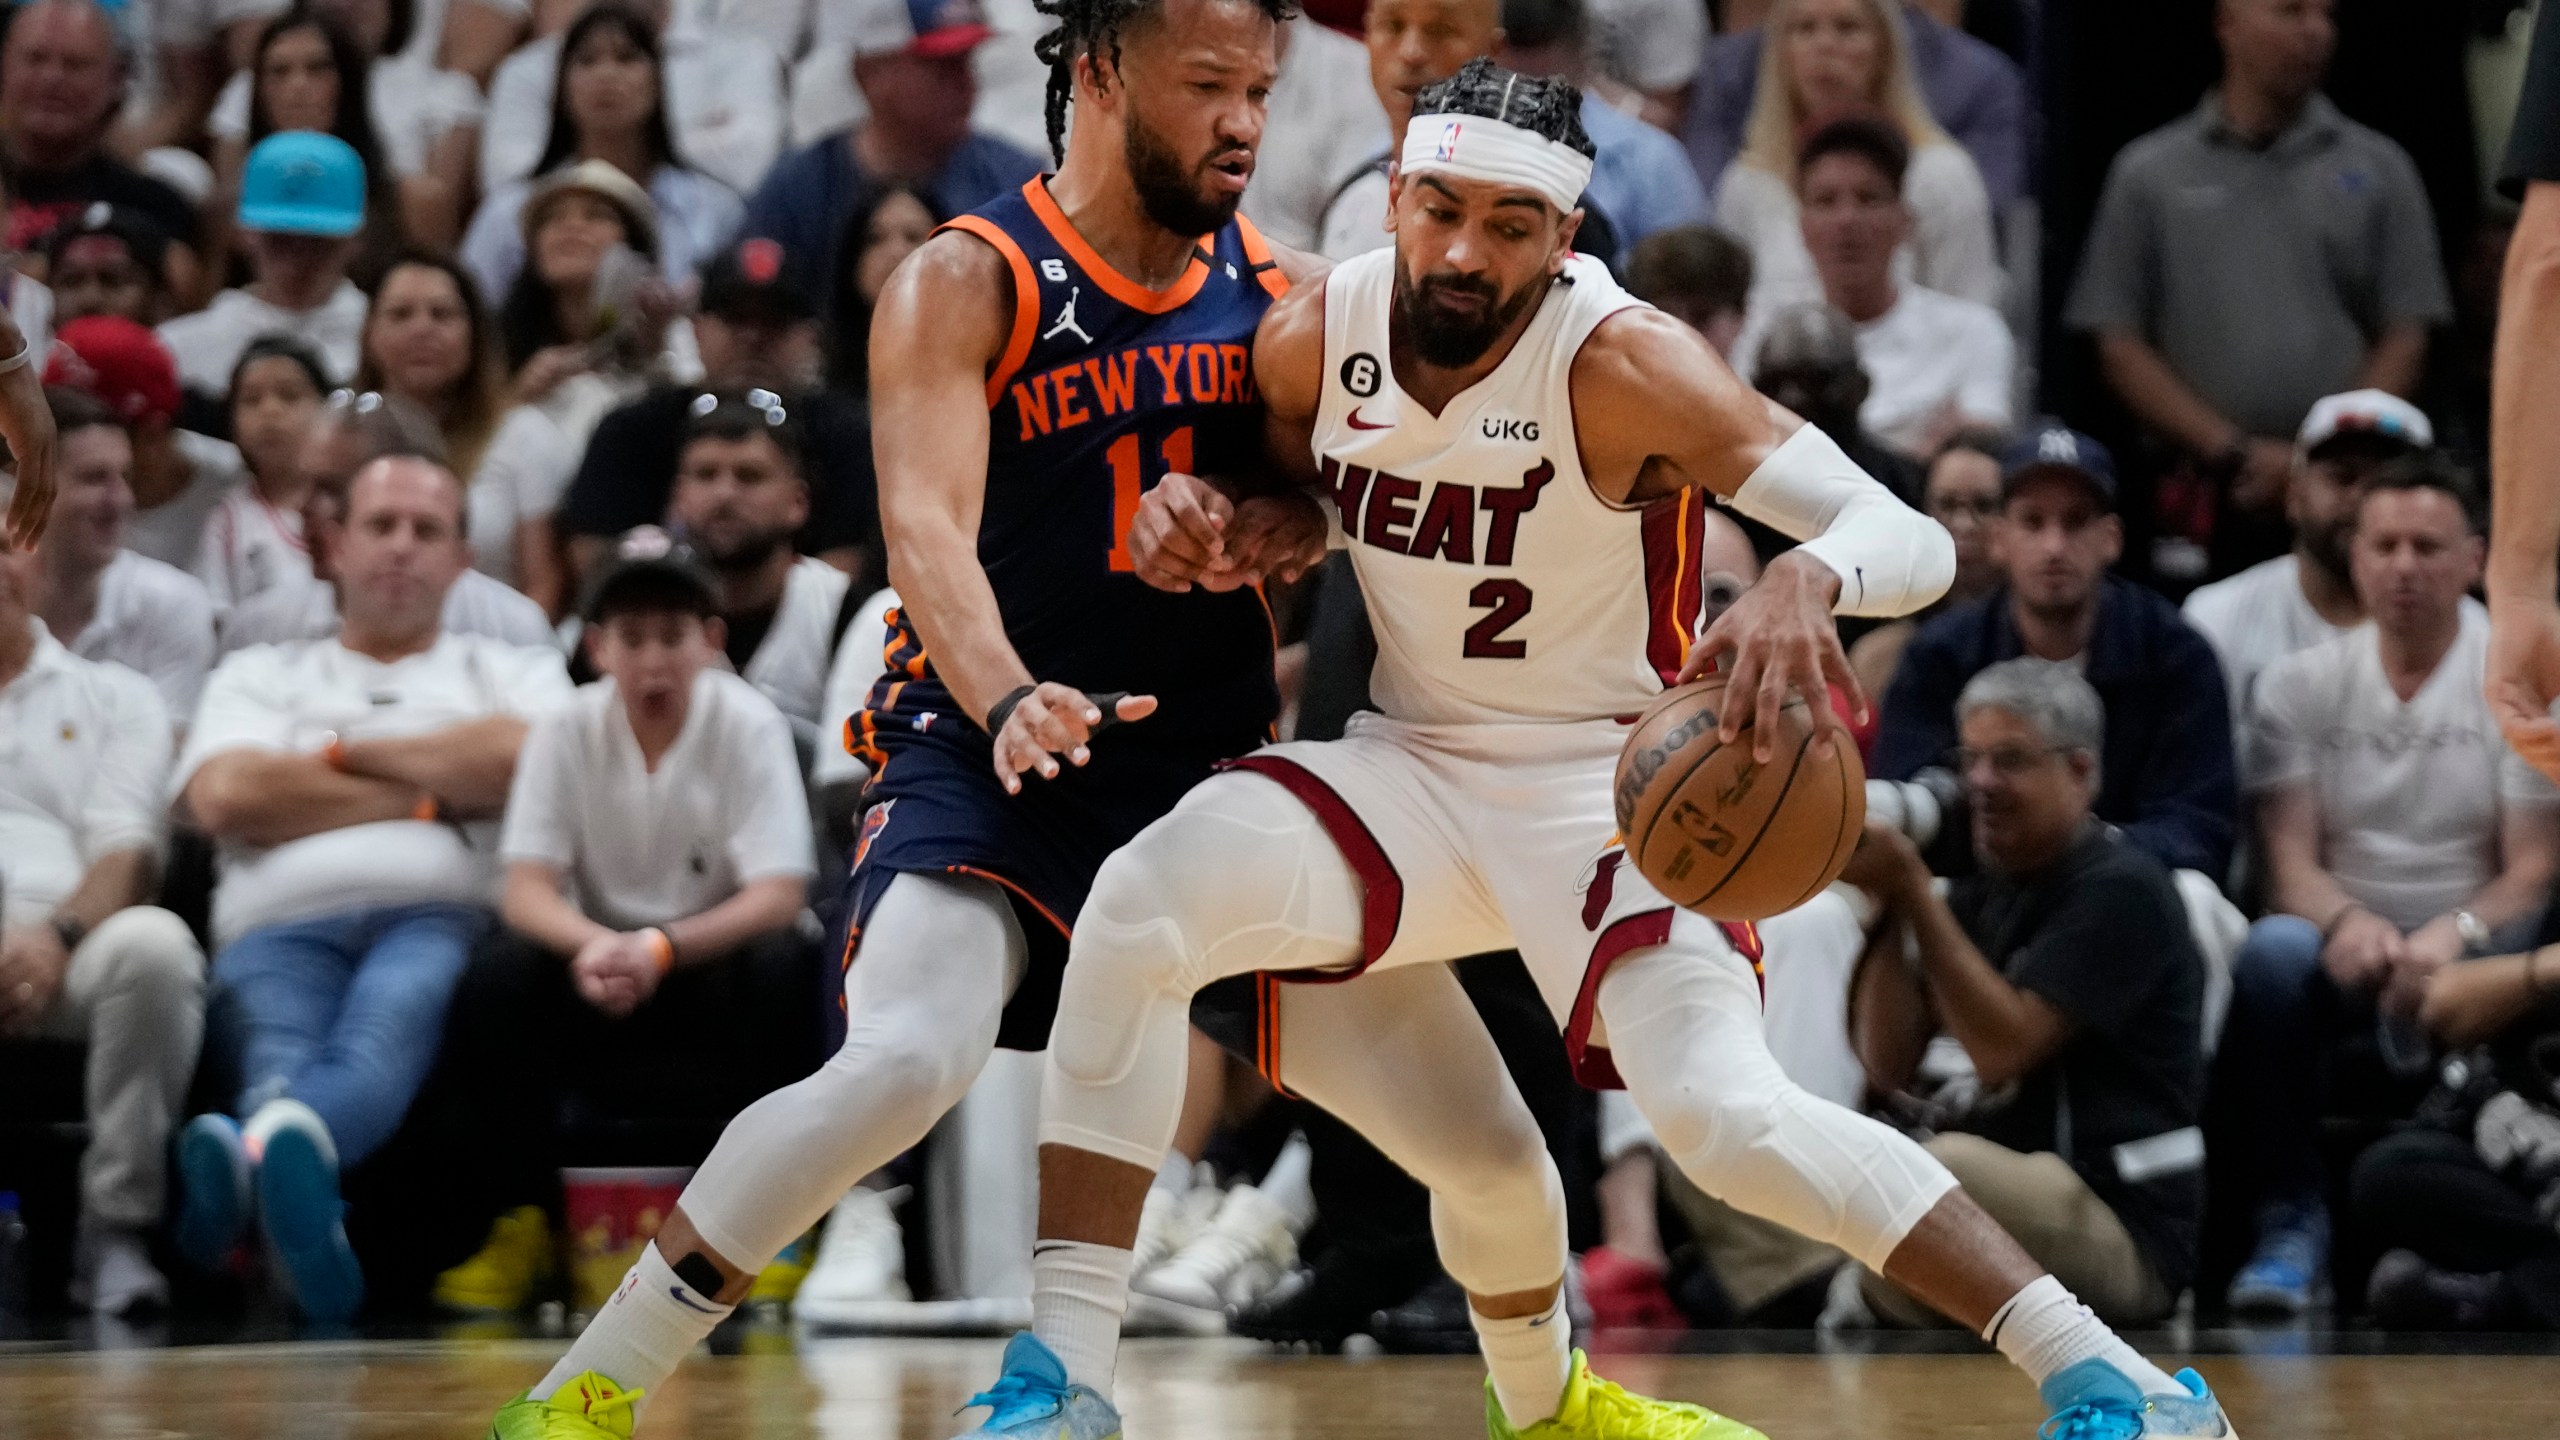 Miami Heat guard Gabe Vincent (2) drives up against New York Knicks guard Jalen Brunson (11) during the first half of Game 3 of an NBA basketball second-round playoff series, Saturday, May 6, 2023, in Miami. (AP Photo/Wilfredo Lee)